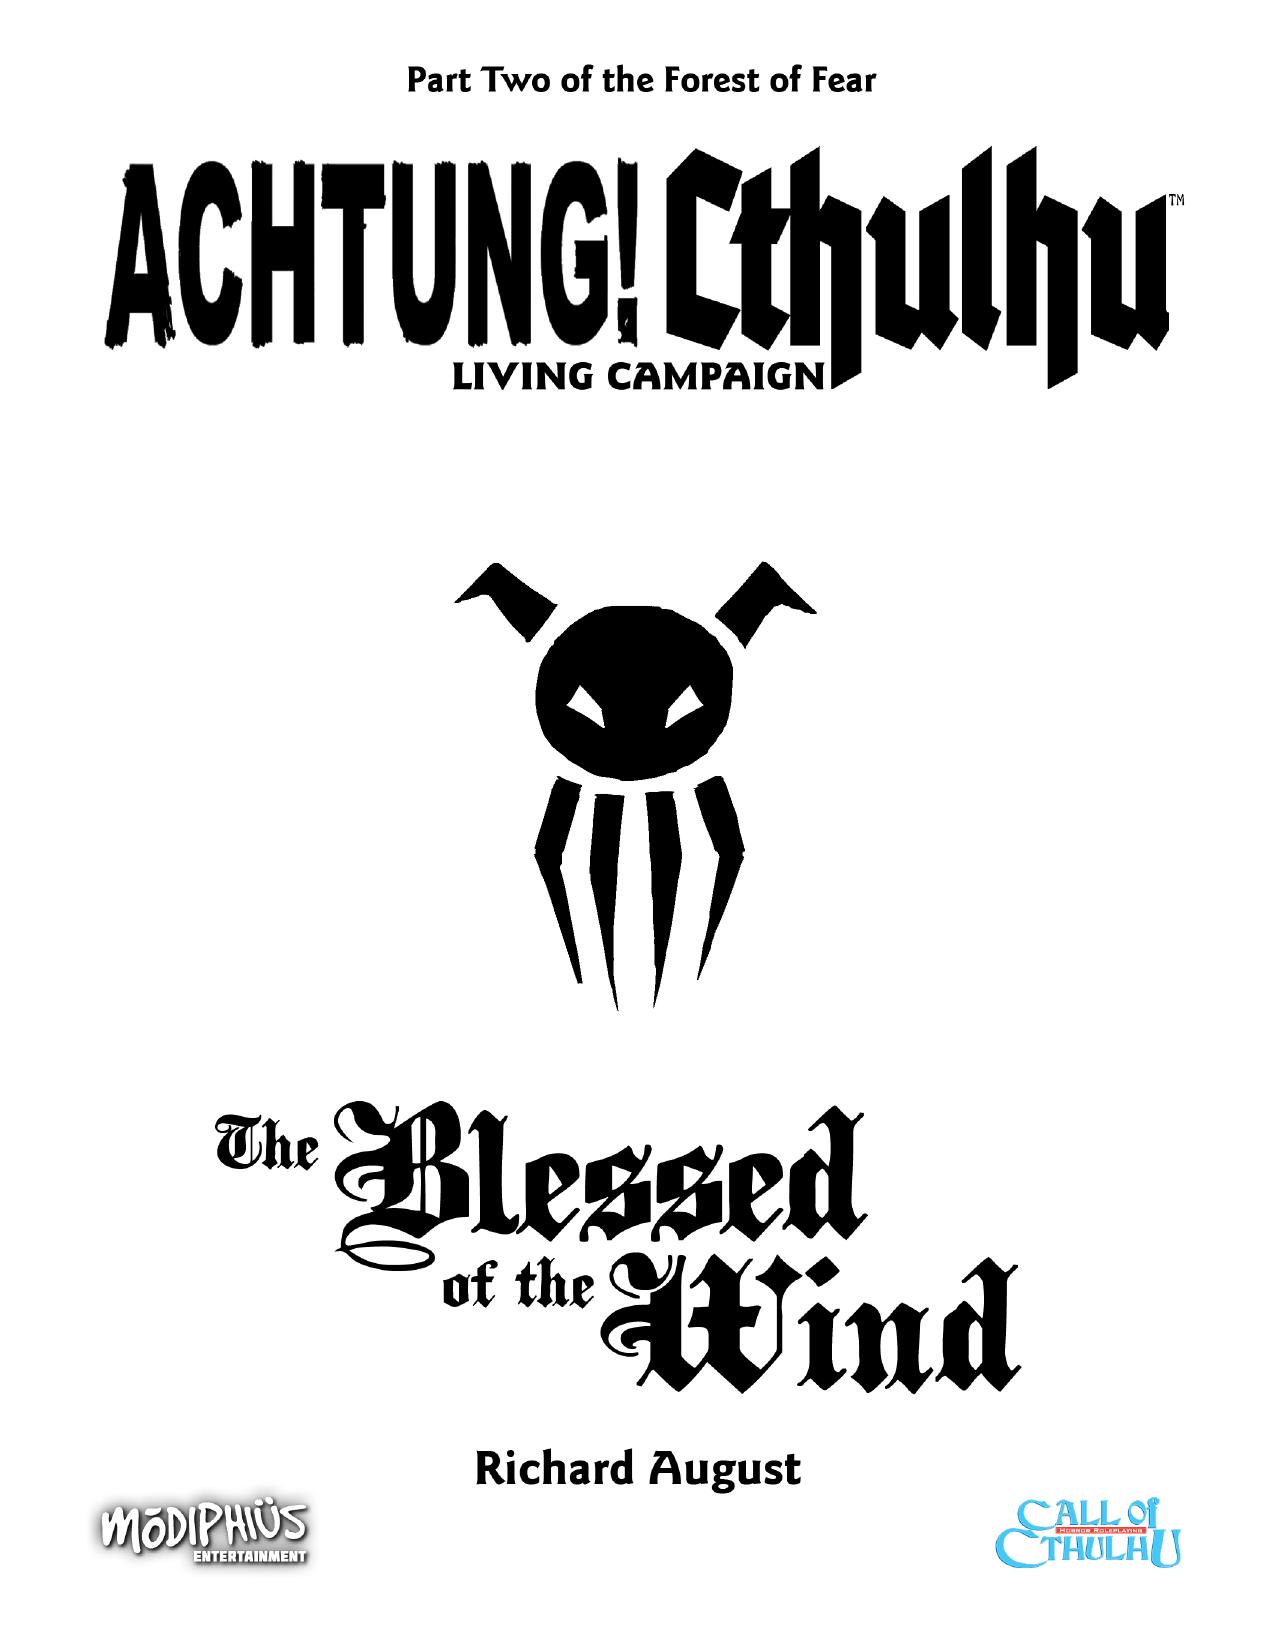 Achtung! Cthulhu - Forest of Fear 02